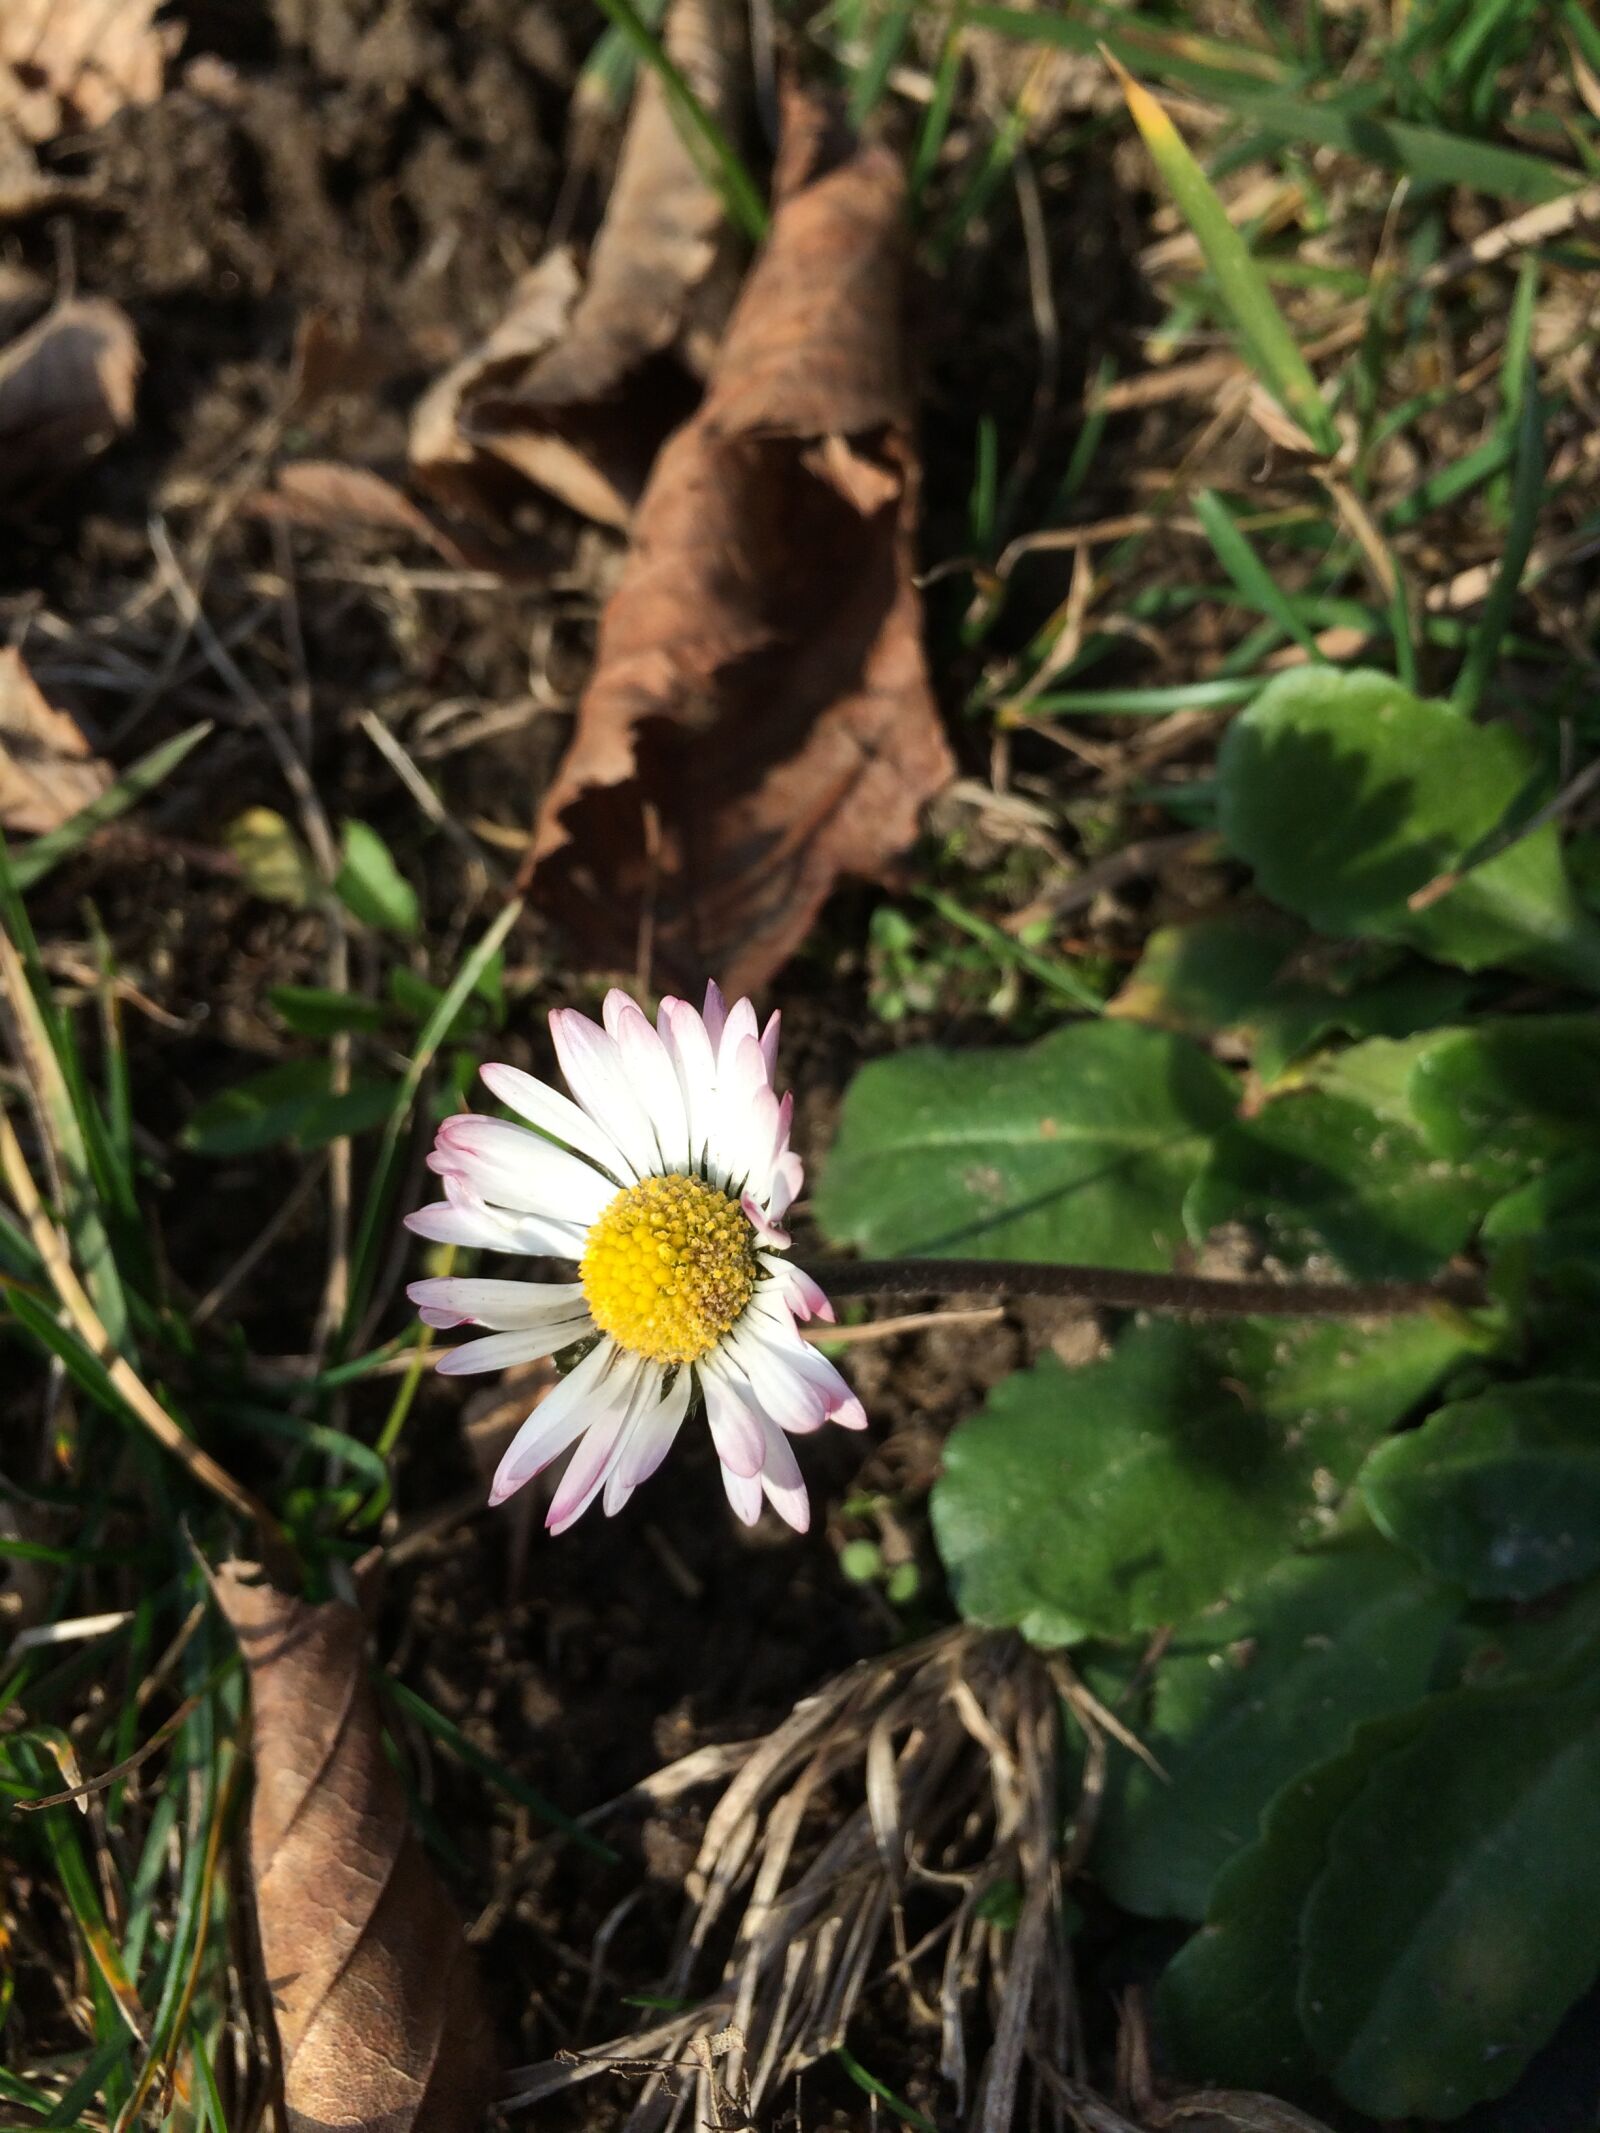 iPhone 5s back camera 4.15mm f/2.2 sample photo. Daisy, nature, flower photography